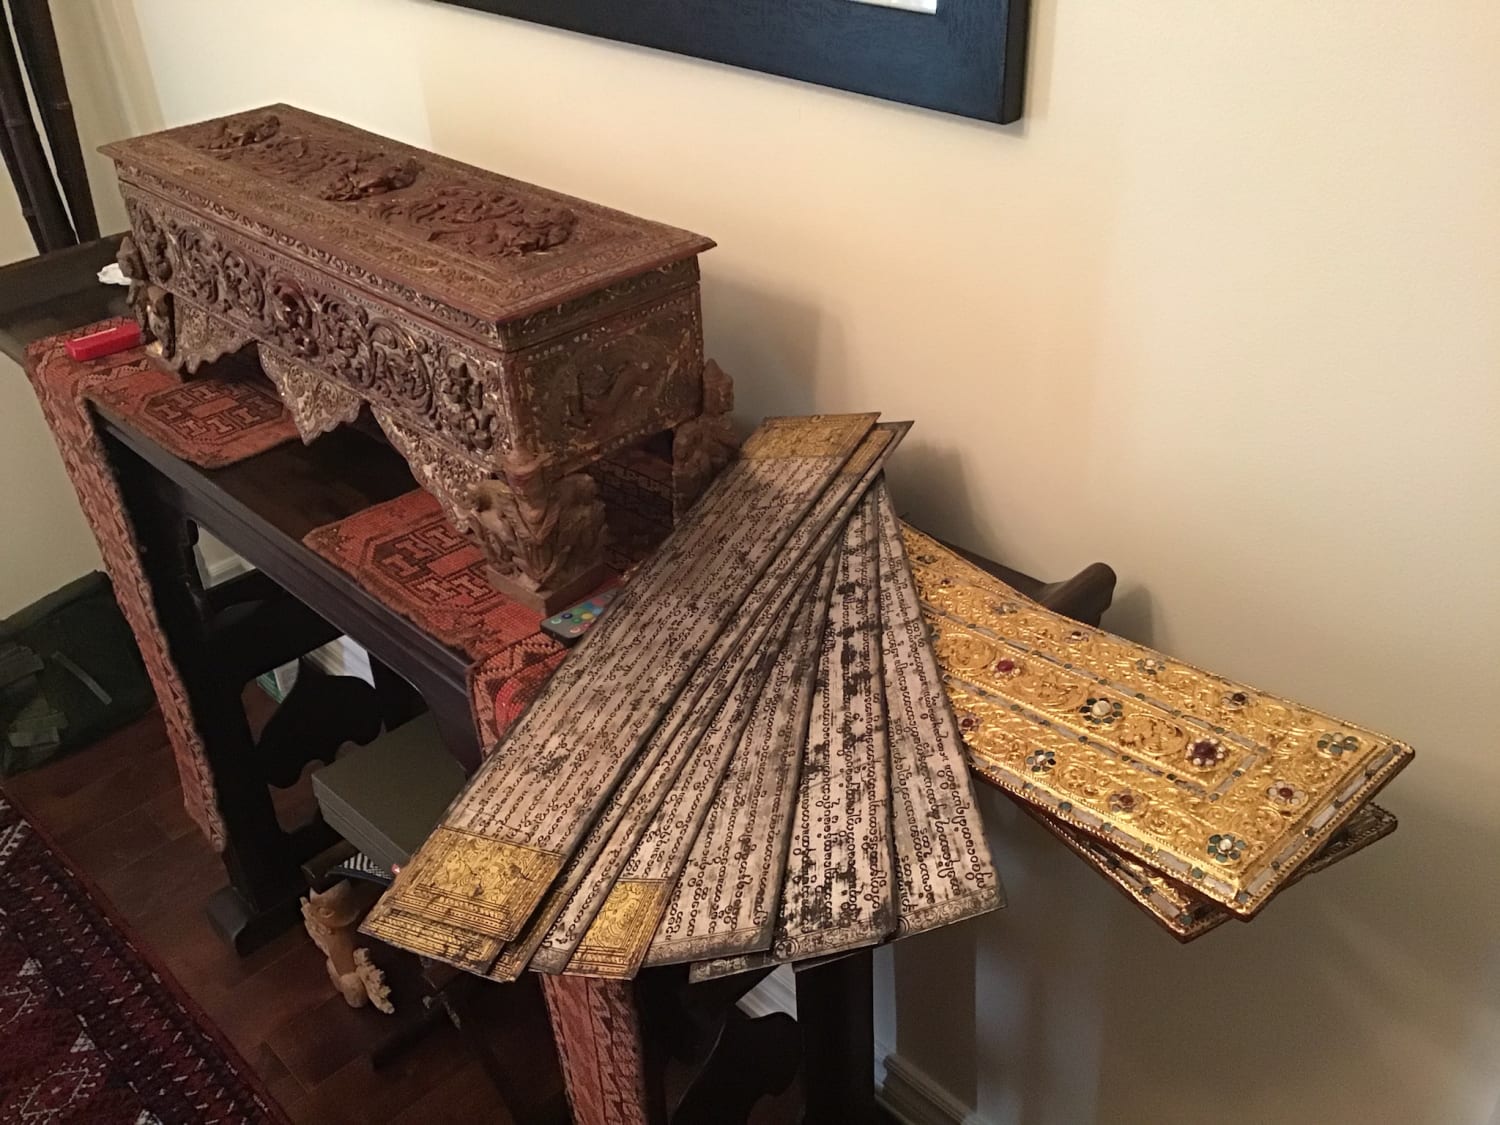 Was told you good folks may appreciate this: One of my most cherished possessions: Burmese (Myanmar) Kammacava, and the Sadaik Manuscript Chest which holds the Kammacava